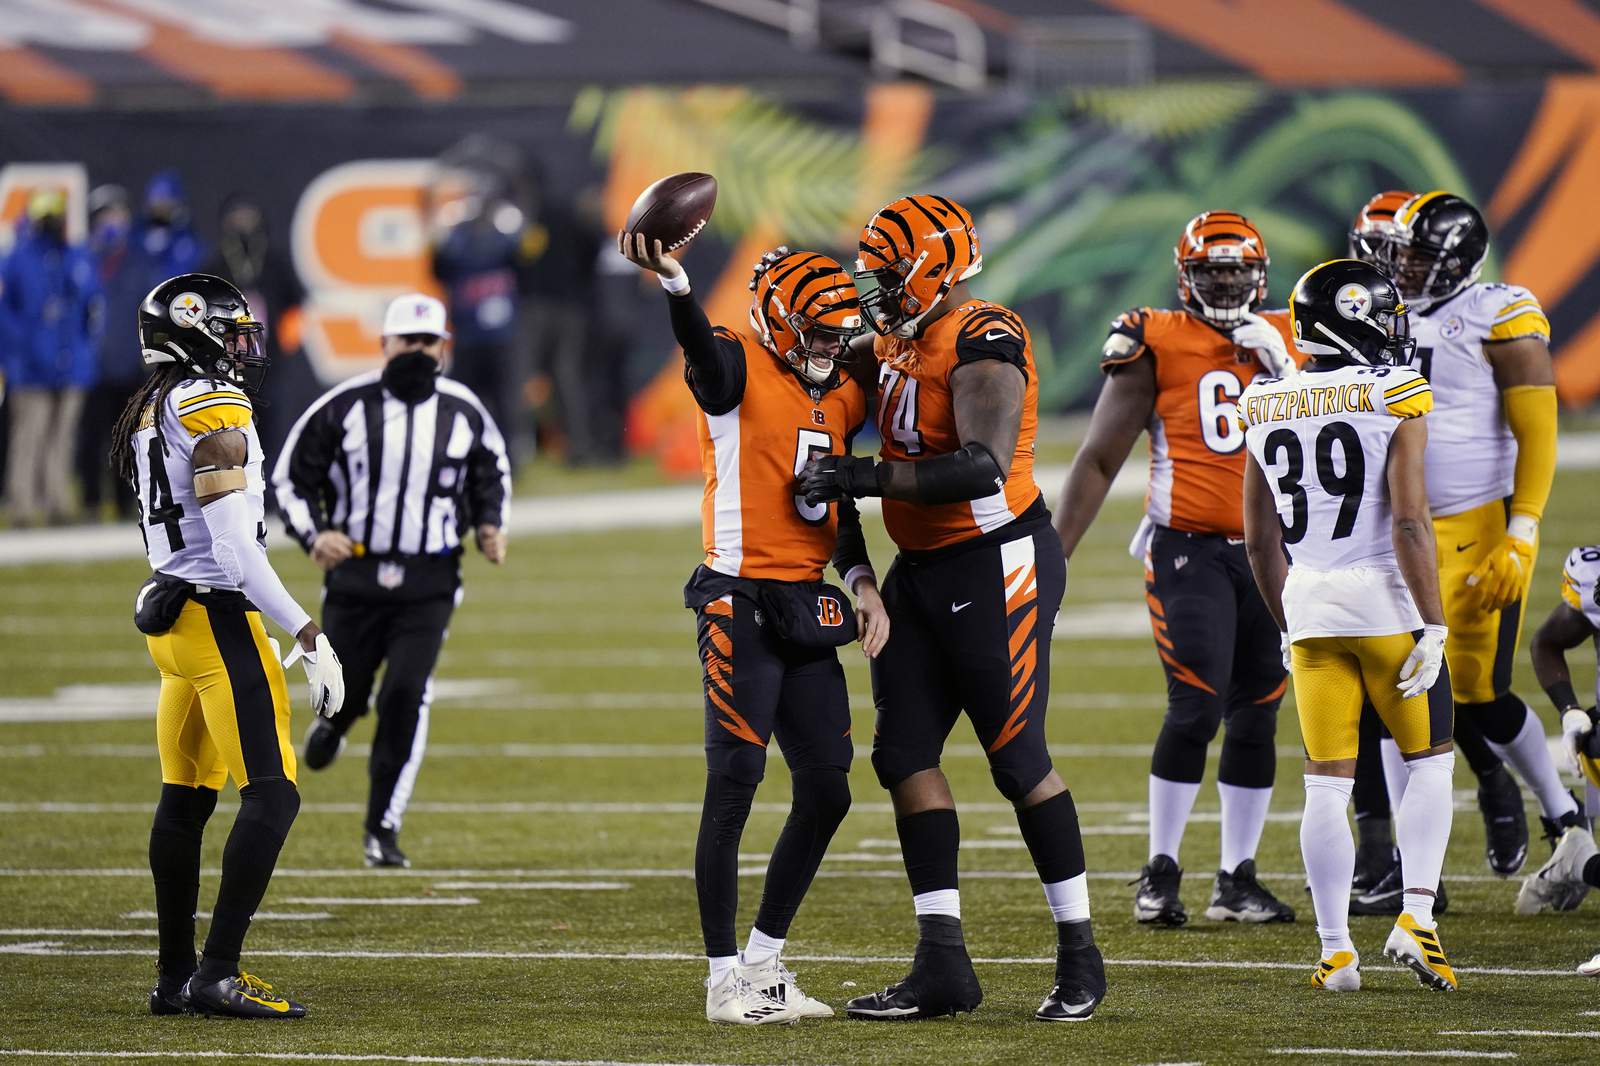 Bengals ride big first half to shocking win over Steelers